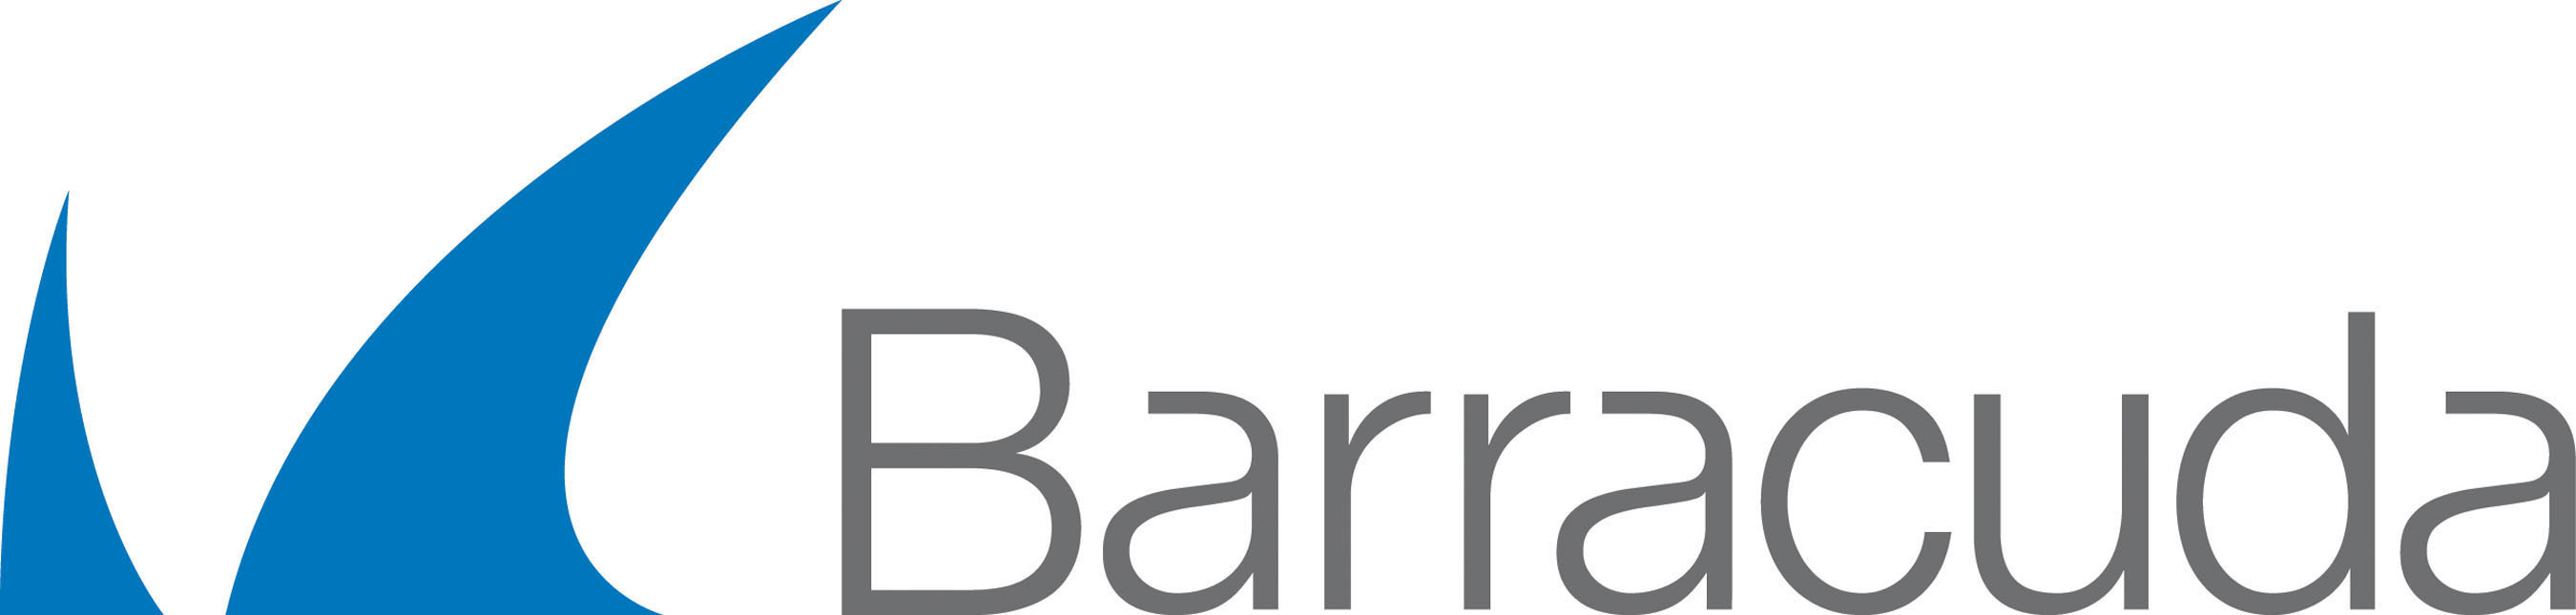 Barracuda Reporting Server for 600 Vx - Subscription License - 1 License - 1 Month